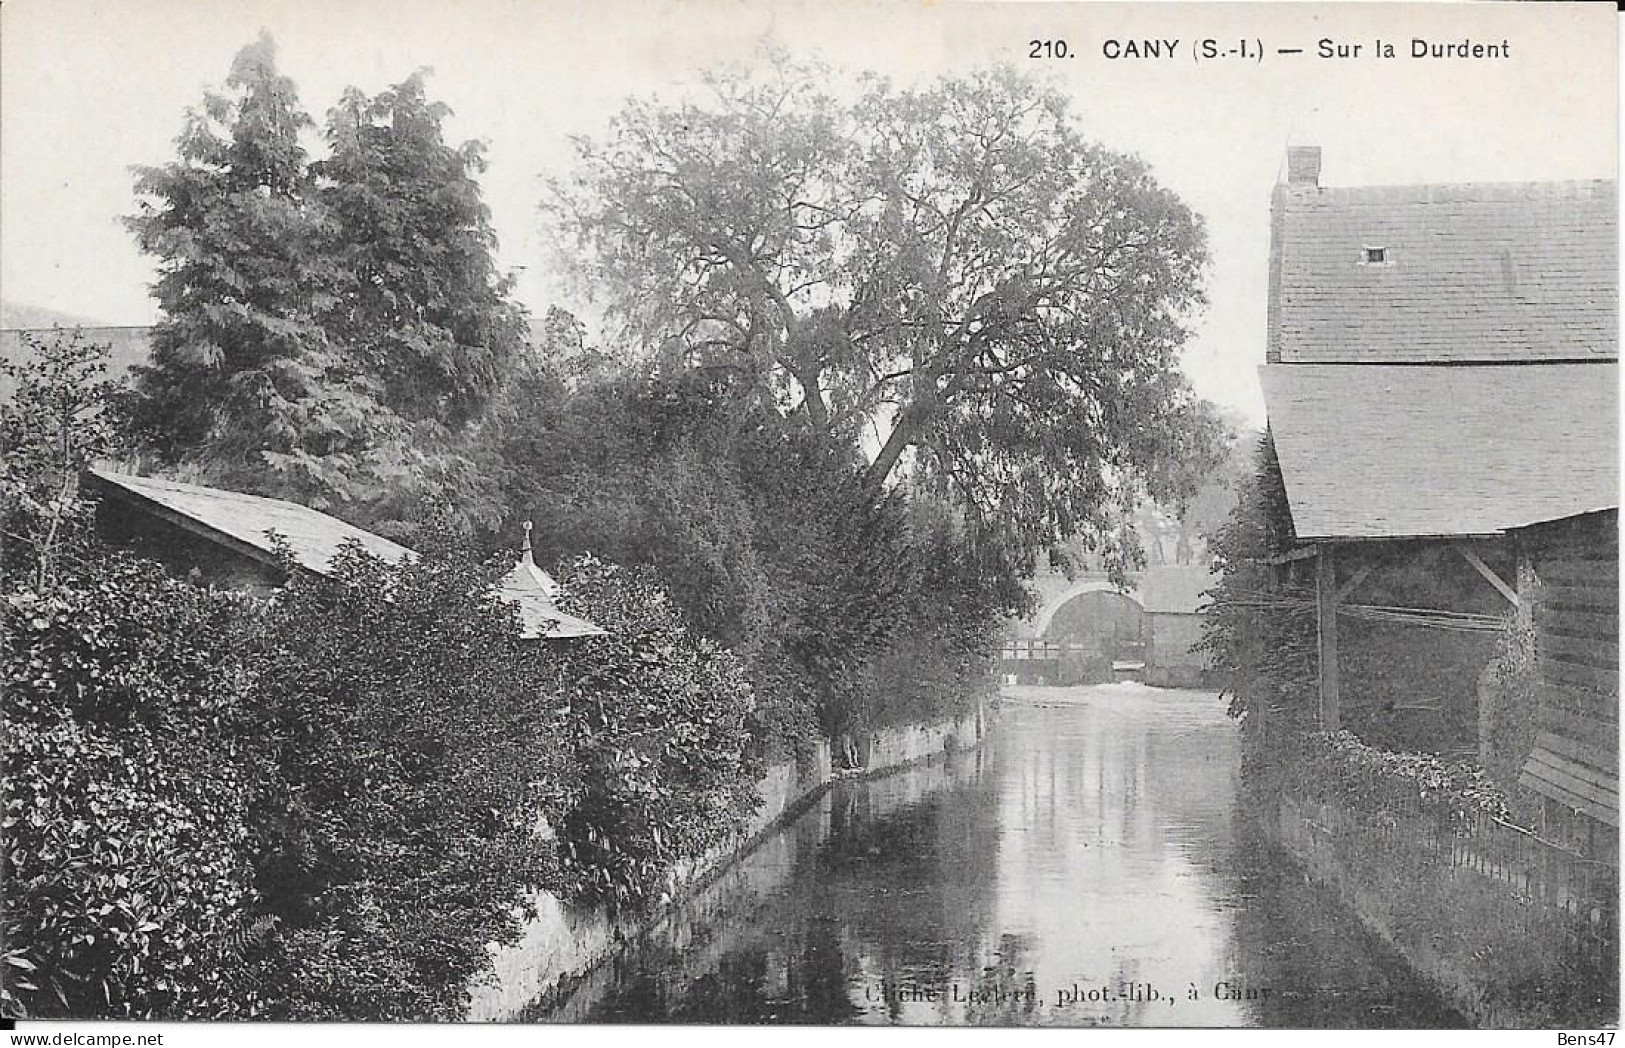 76 Cany Sur La Durent - Cany Barville